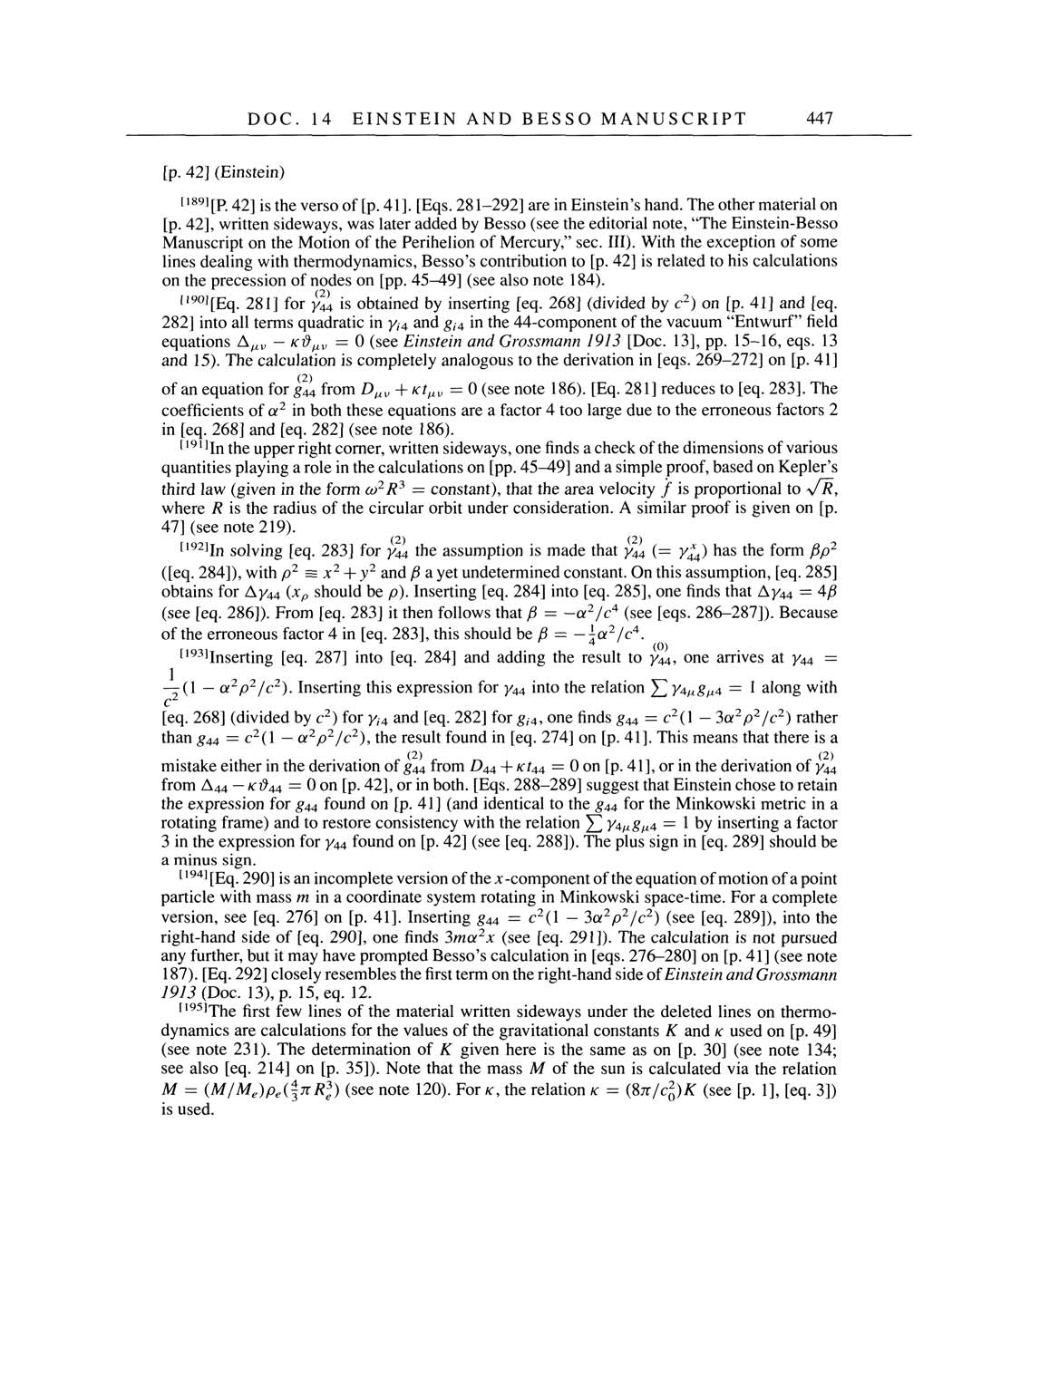 Volume 4: The Swiss Years: Writings 1912-1914 page 447